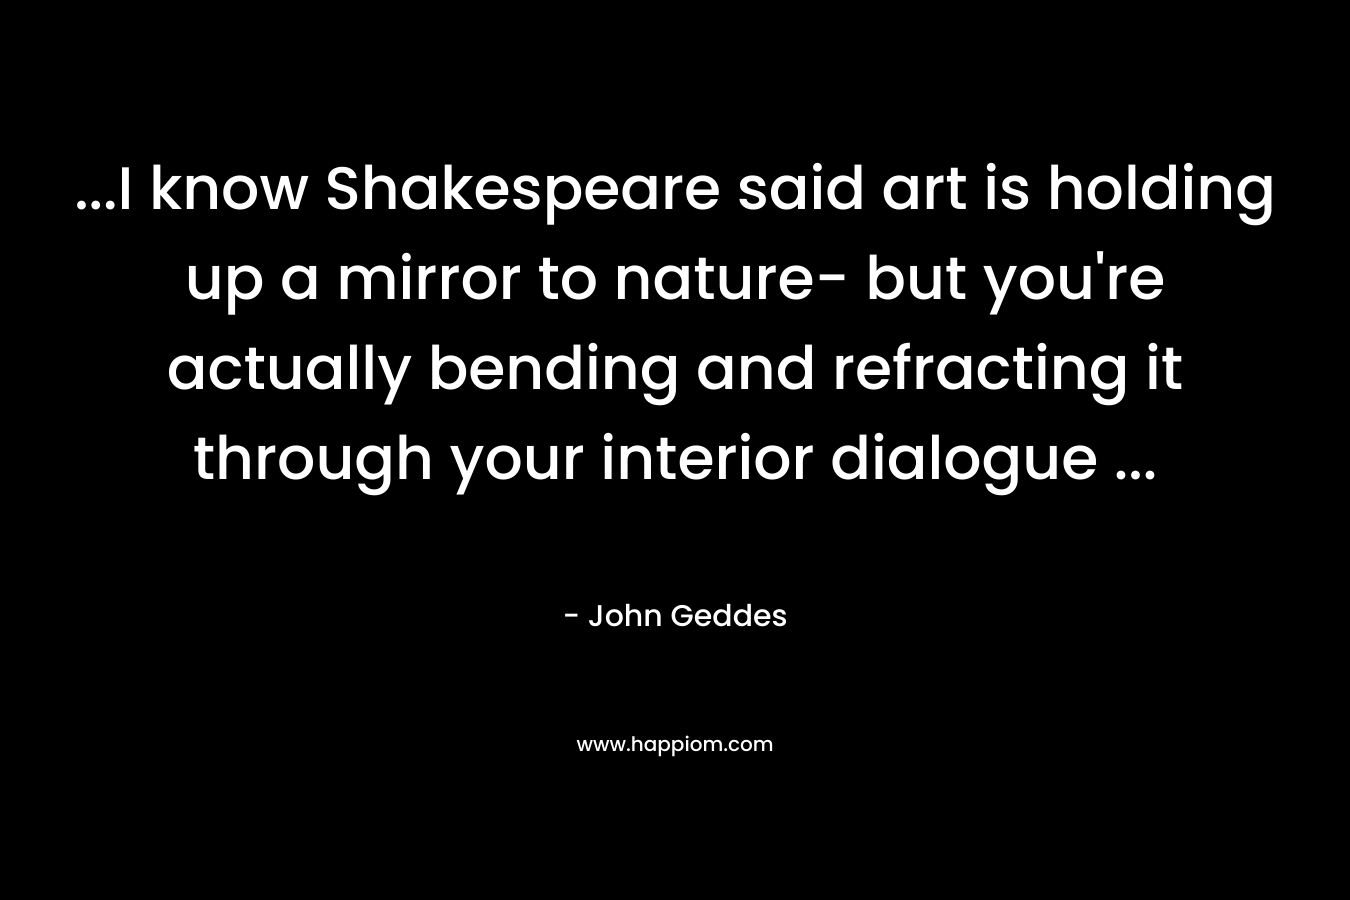 …I know Shakespeare said art is holding up a mirror to nature- but you’re actually bending and refracting it through your interior dialogue … – John Geddes